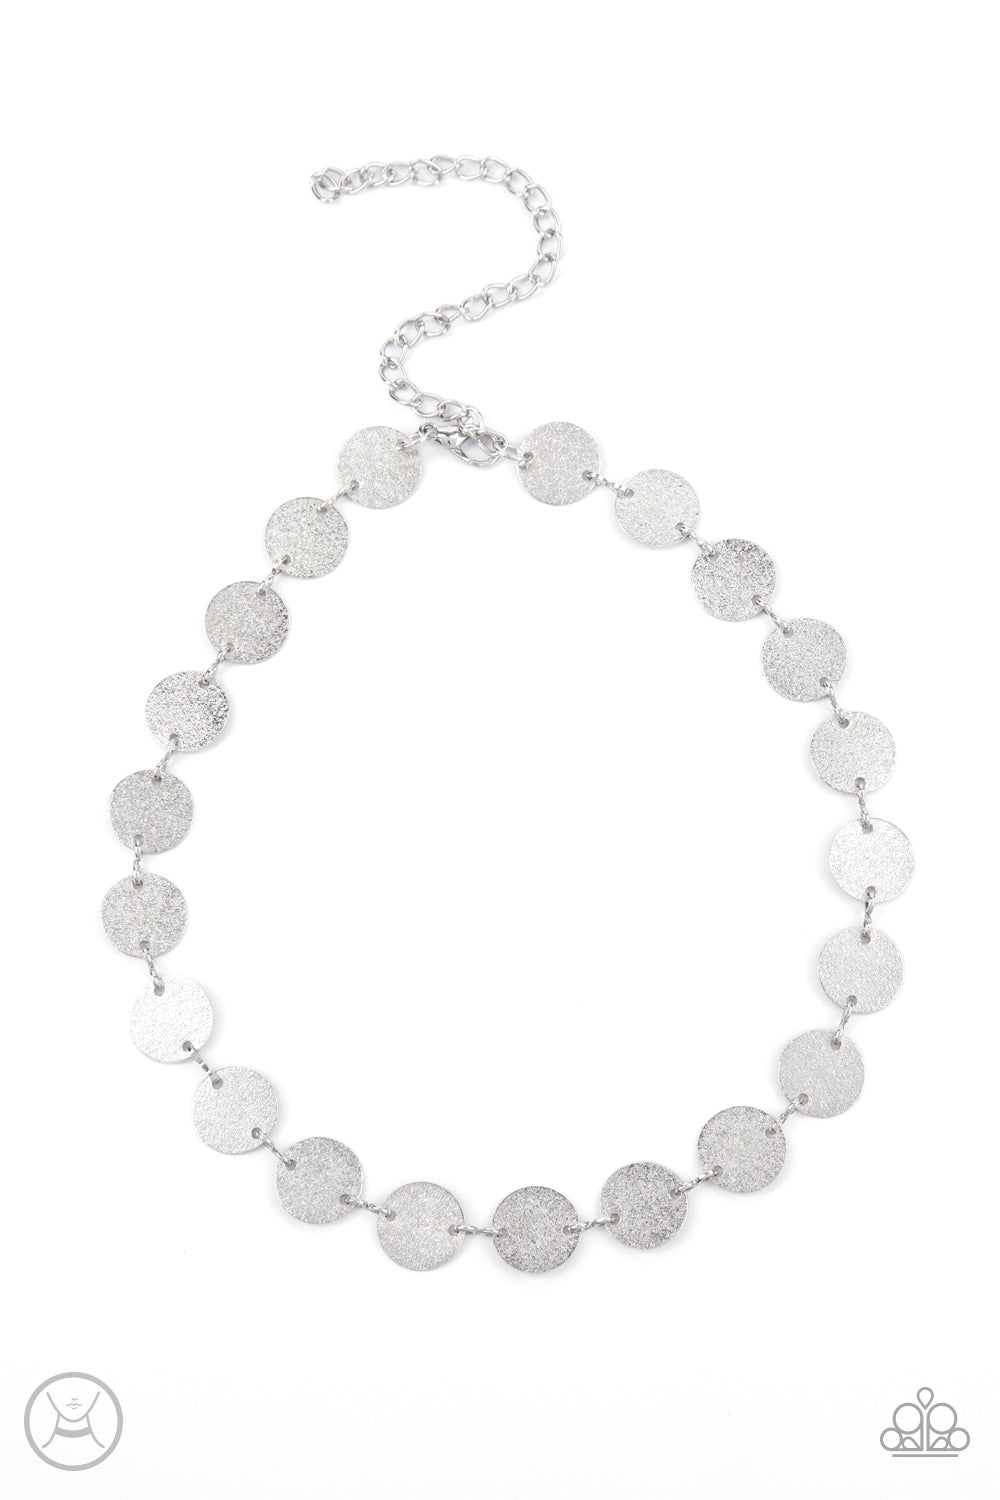 Reflection Detection - Silver Choker Necklace - Paparazzi Accessories - Hammered in shimmery detail, a shiny collection of dainty silver discs delicately link into a blinding display around the neck. Features an adjustable clasp closure. Sold as one individual choker necklace.